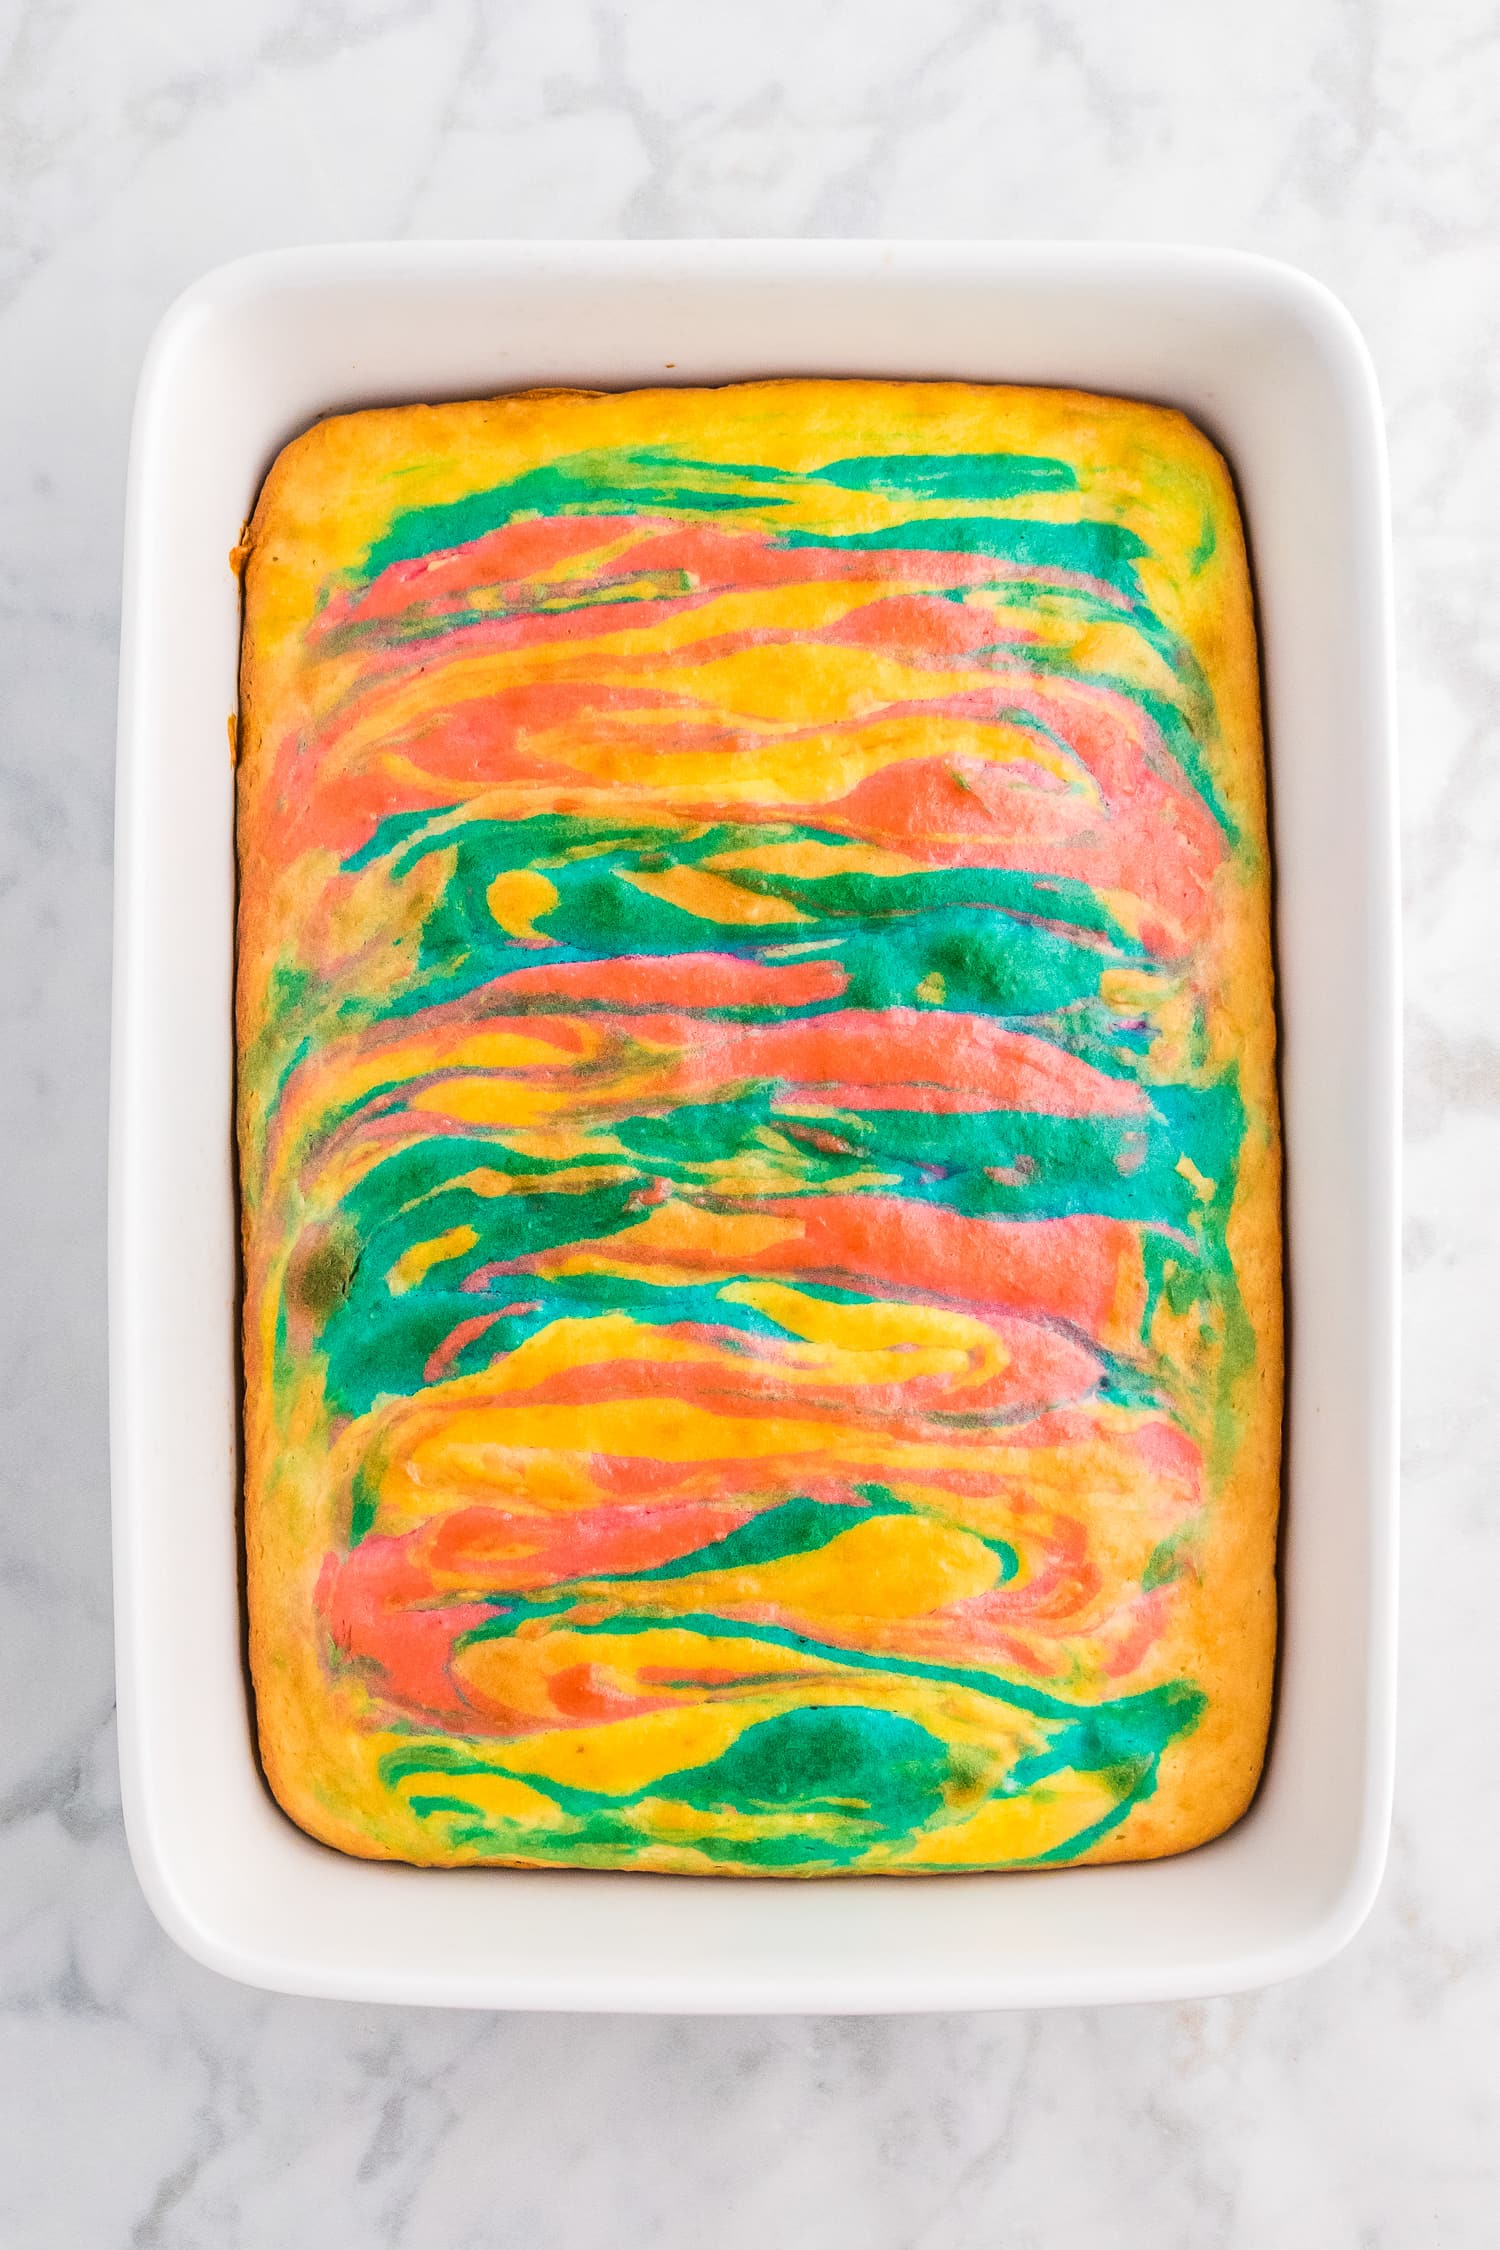 Swirled Cake with springs colors after baking